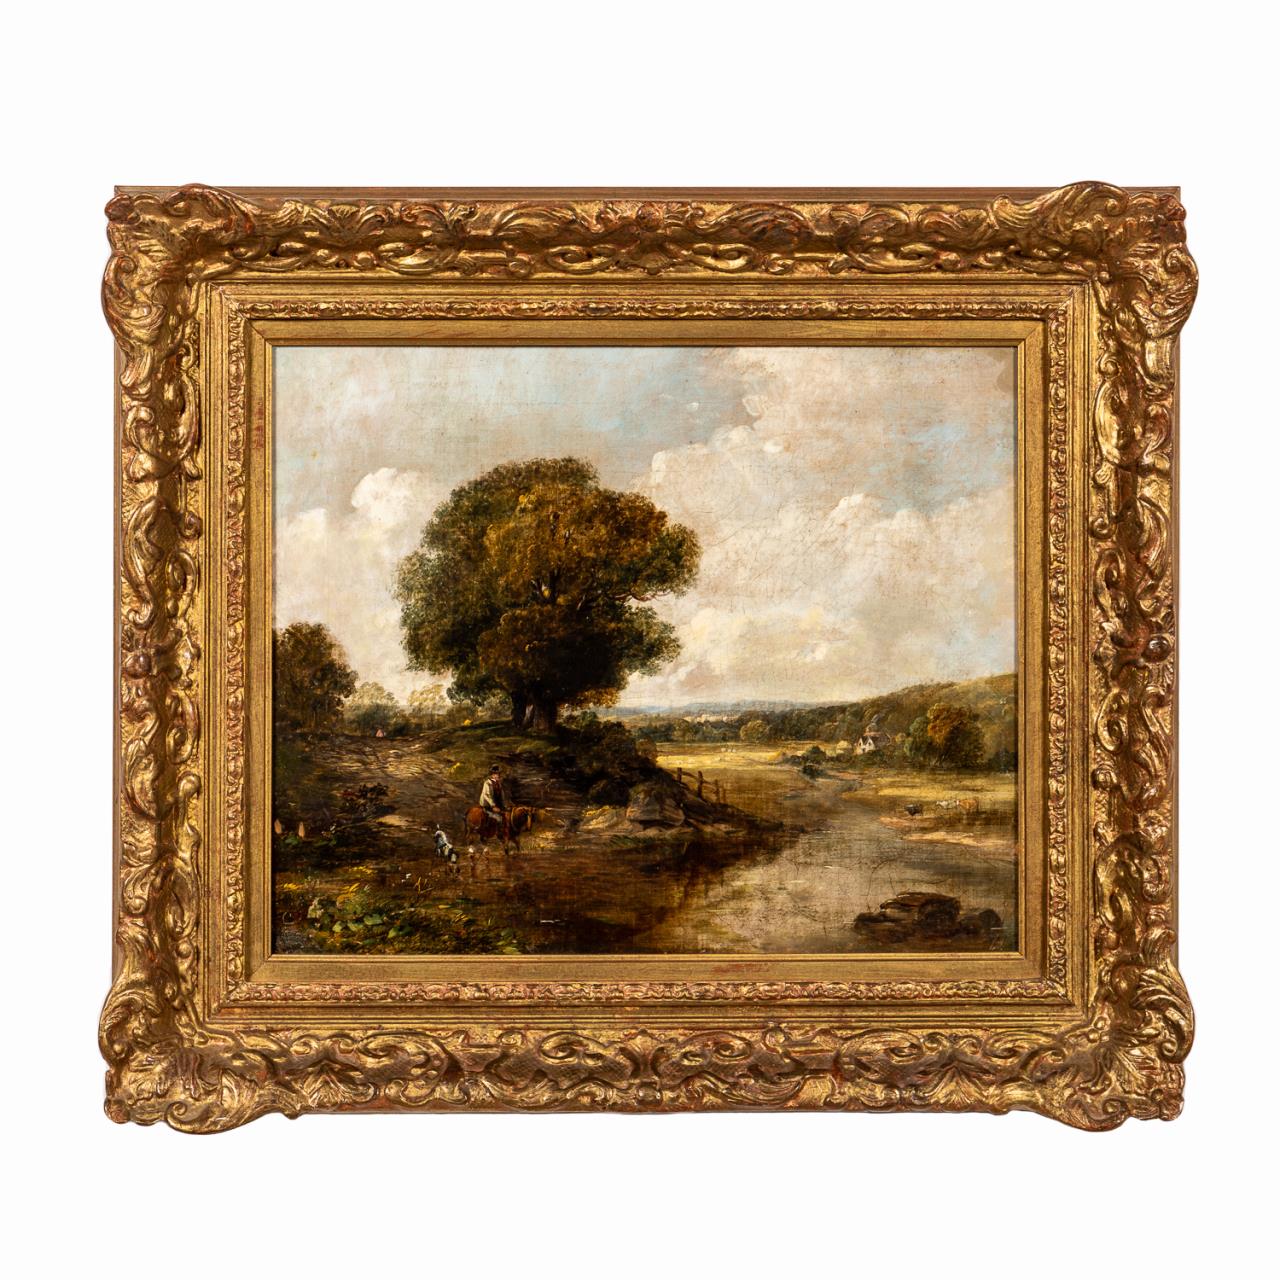 19TH C ENGLISH LANDSCAPE WITH TRAVELER 35a597